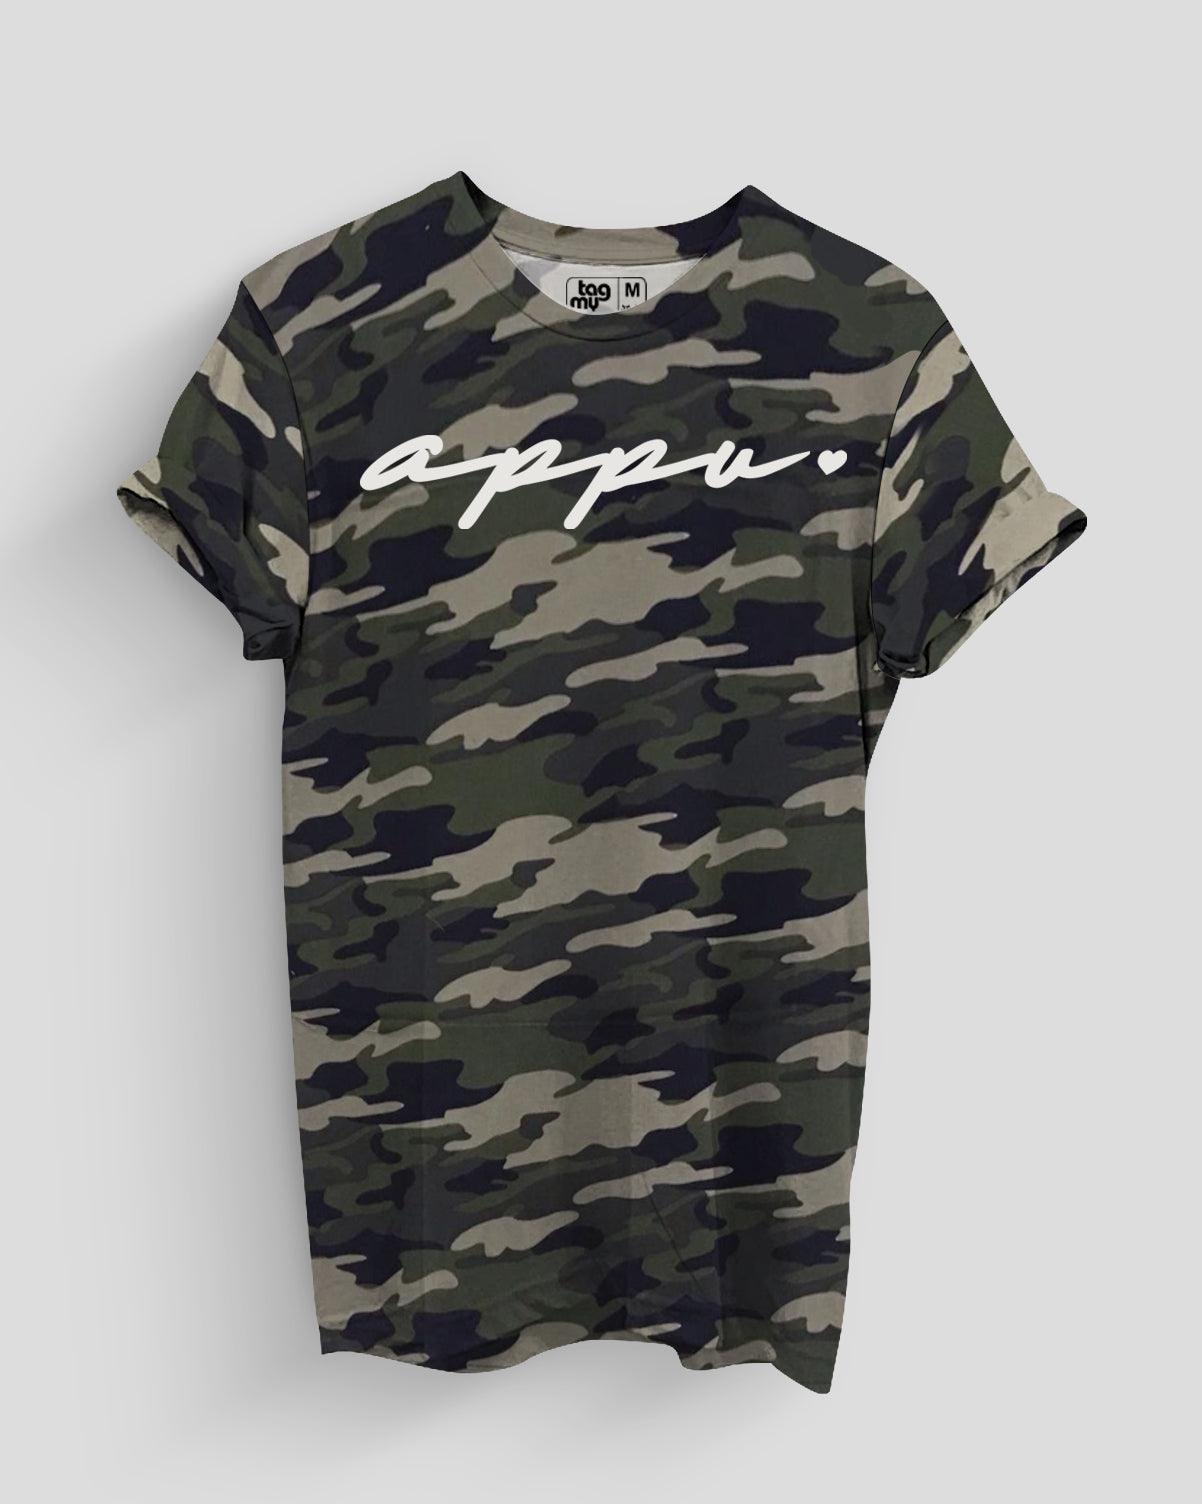 Appu - Camouflage T-Shirt - TagMyTee - Casual T-Shirt